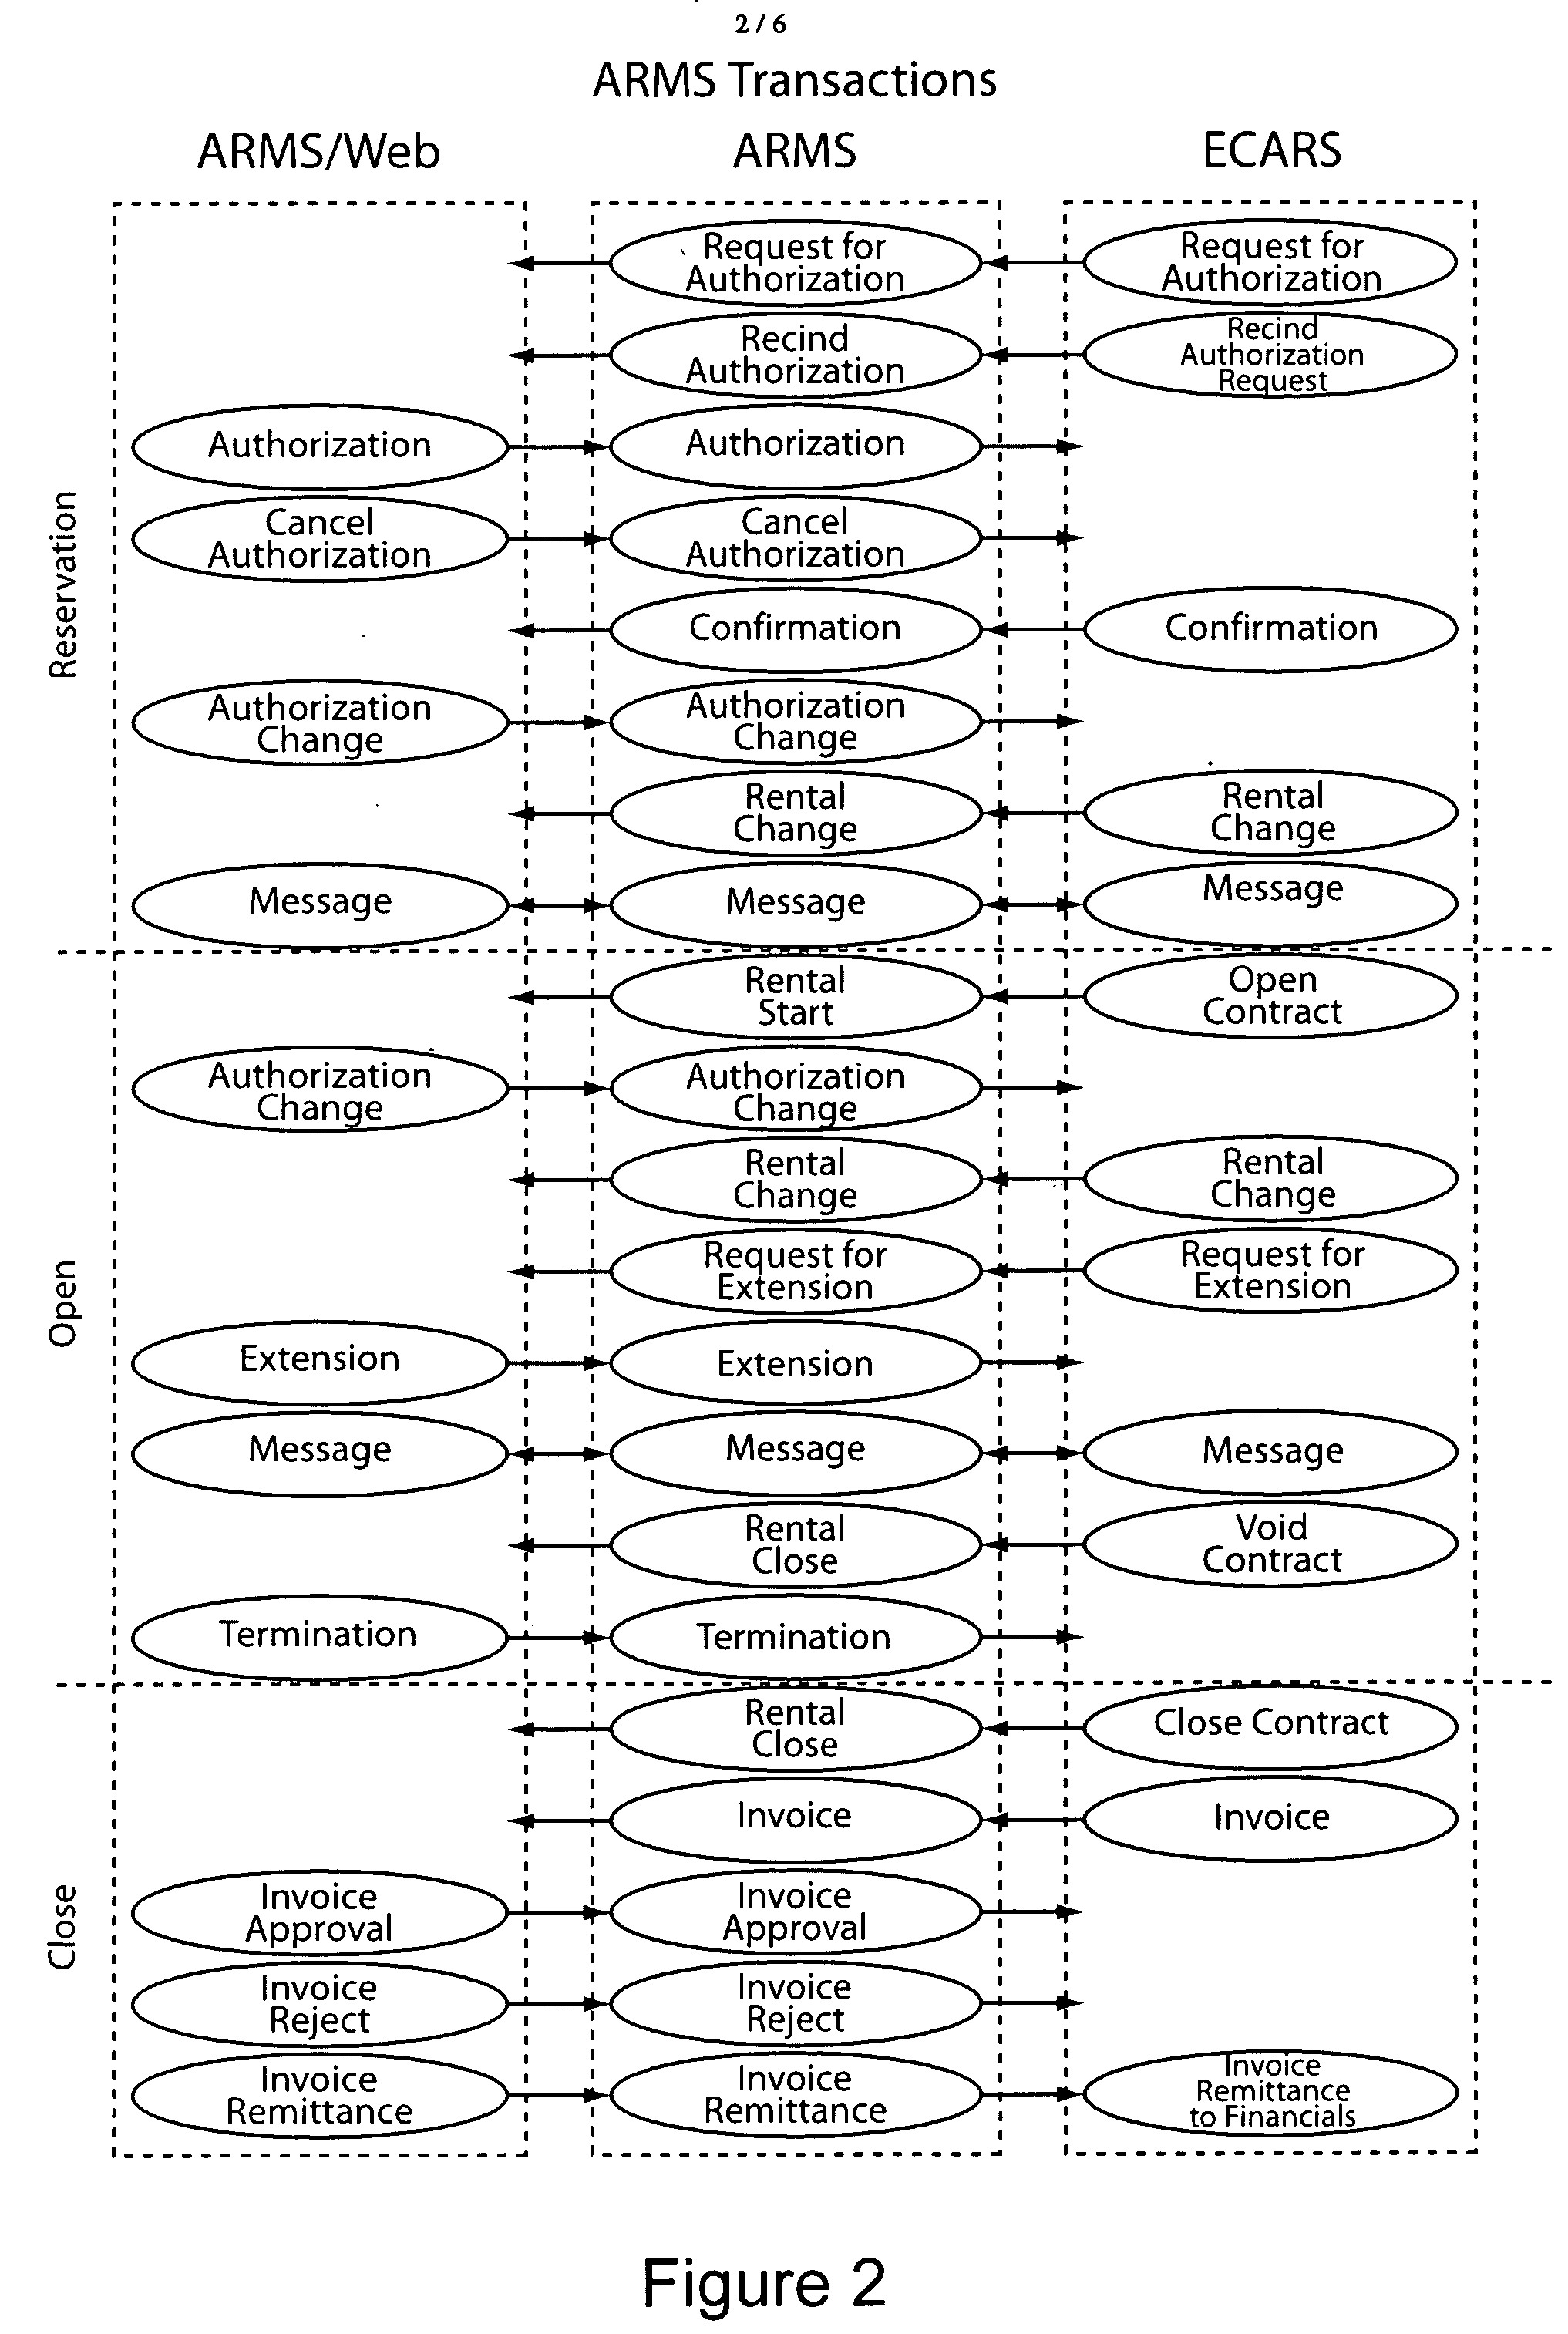 Business to business computer system for communicating and processing rental car reservations using web services